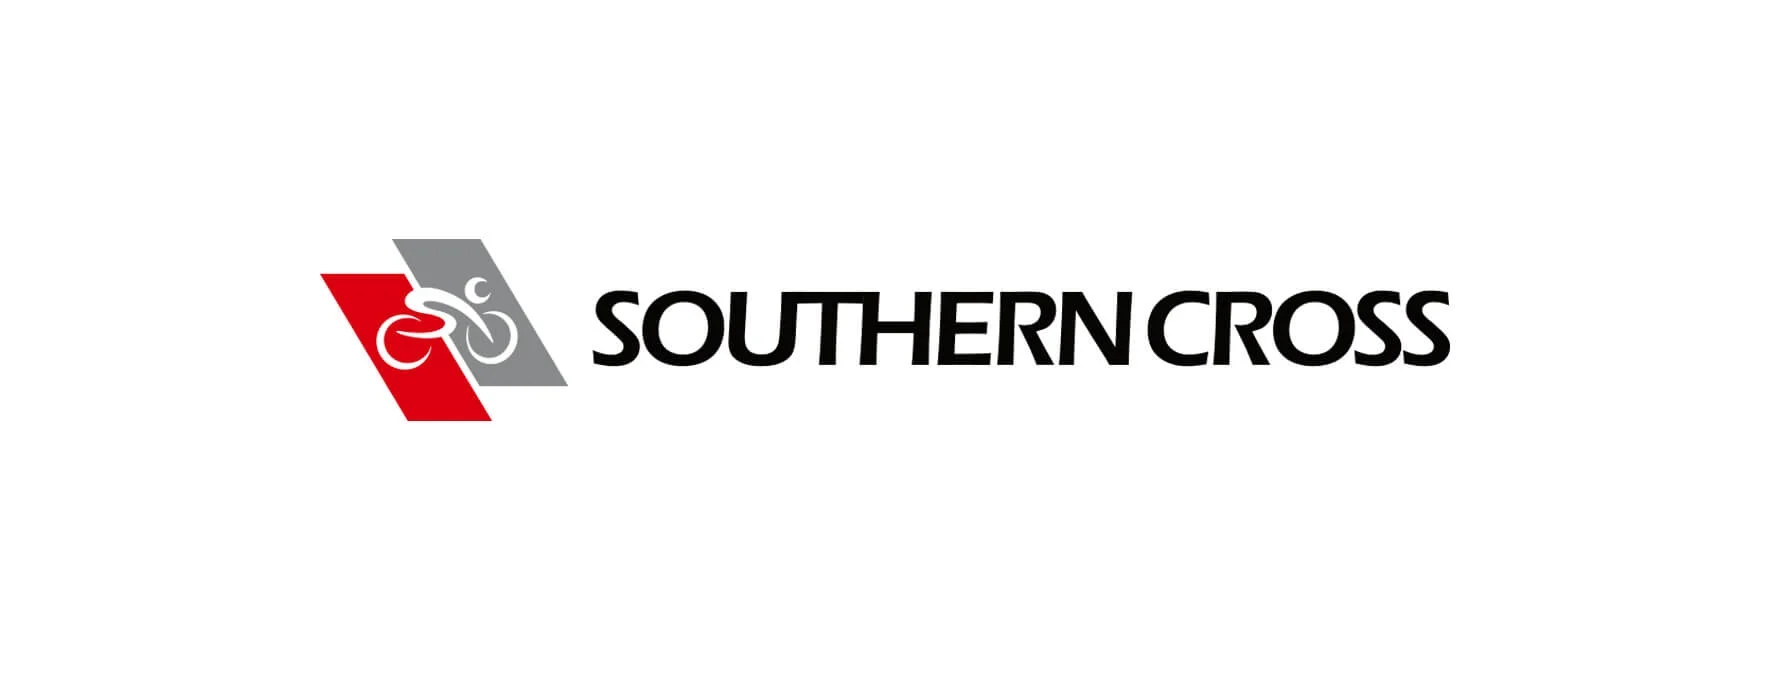 Southerncross brand promotion design and printing